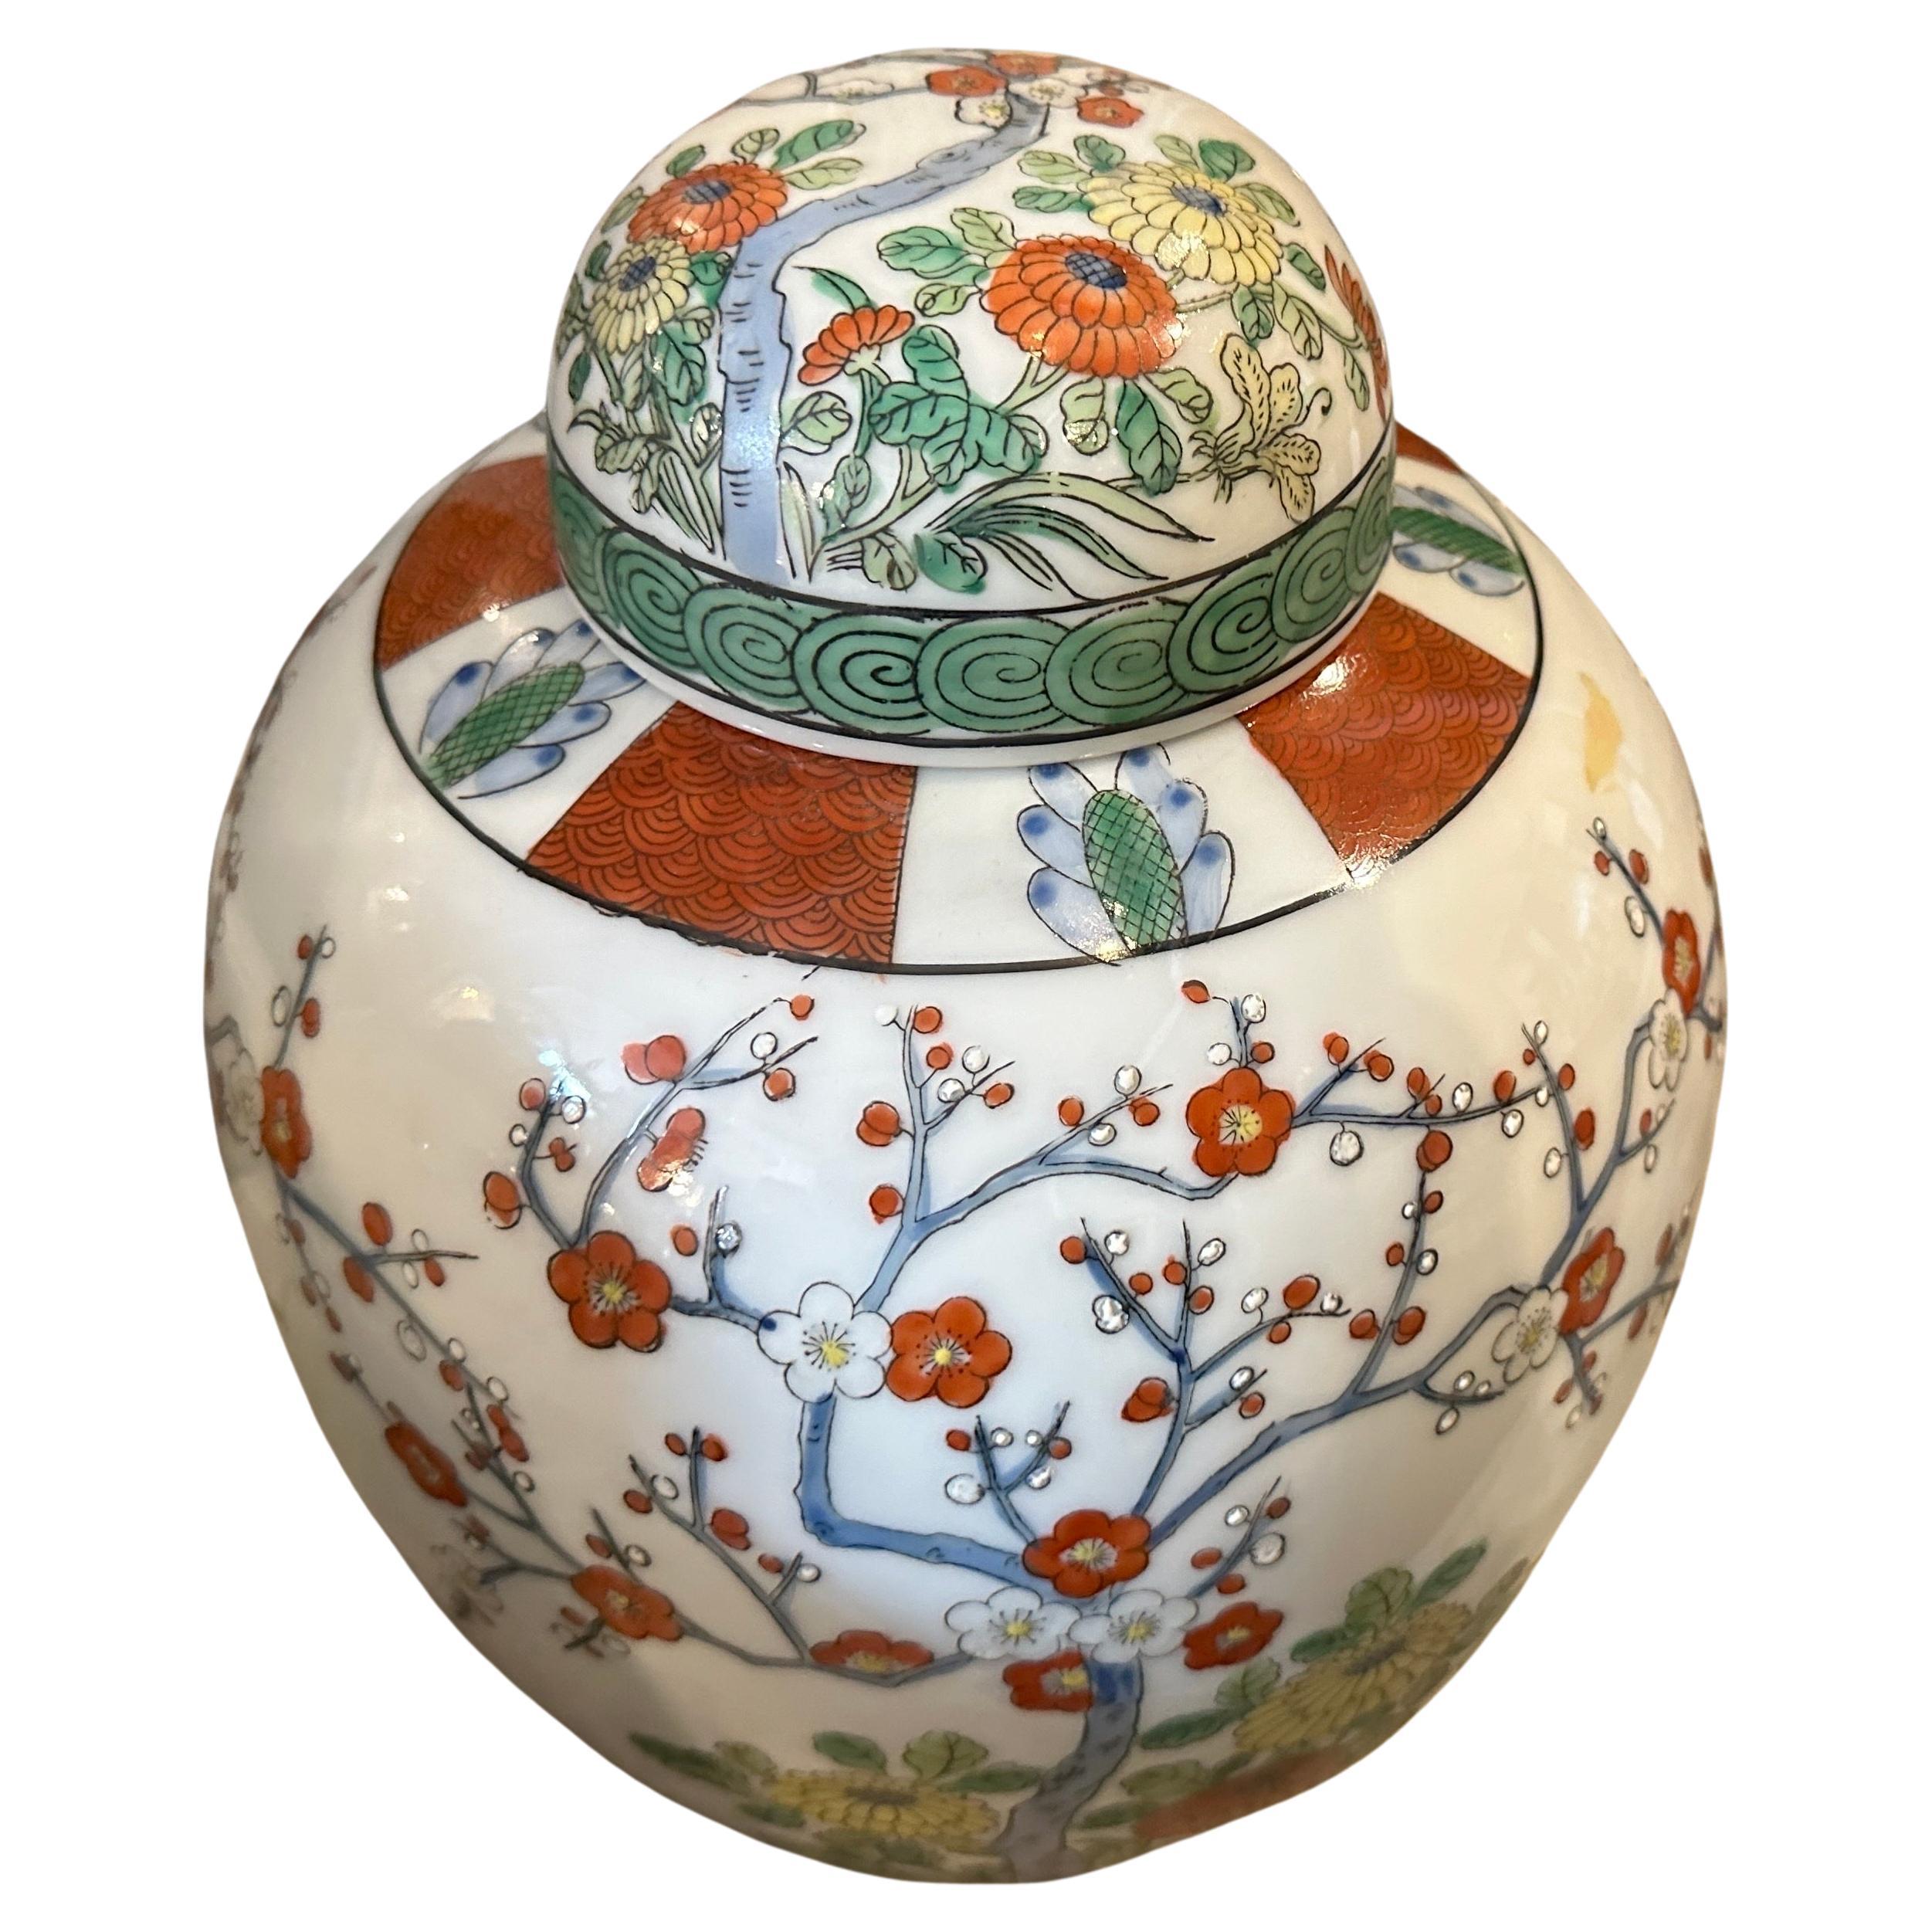 Two hand painted ginger jars hand-crafted in China in the mid-20th century. The decor depicts traditional chinese flowers, the are in lovely condition and marked on the bottom .Hand-painted ginger jars crafted in China during the mid-20th century